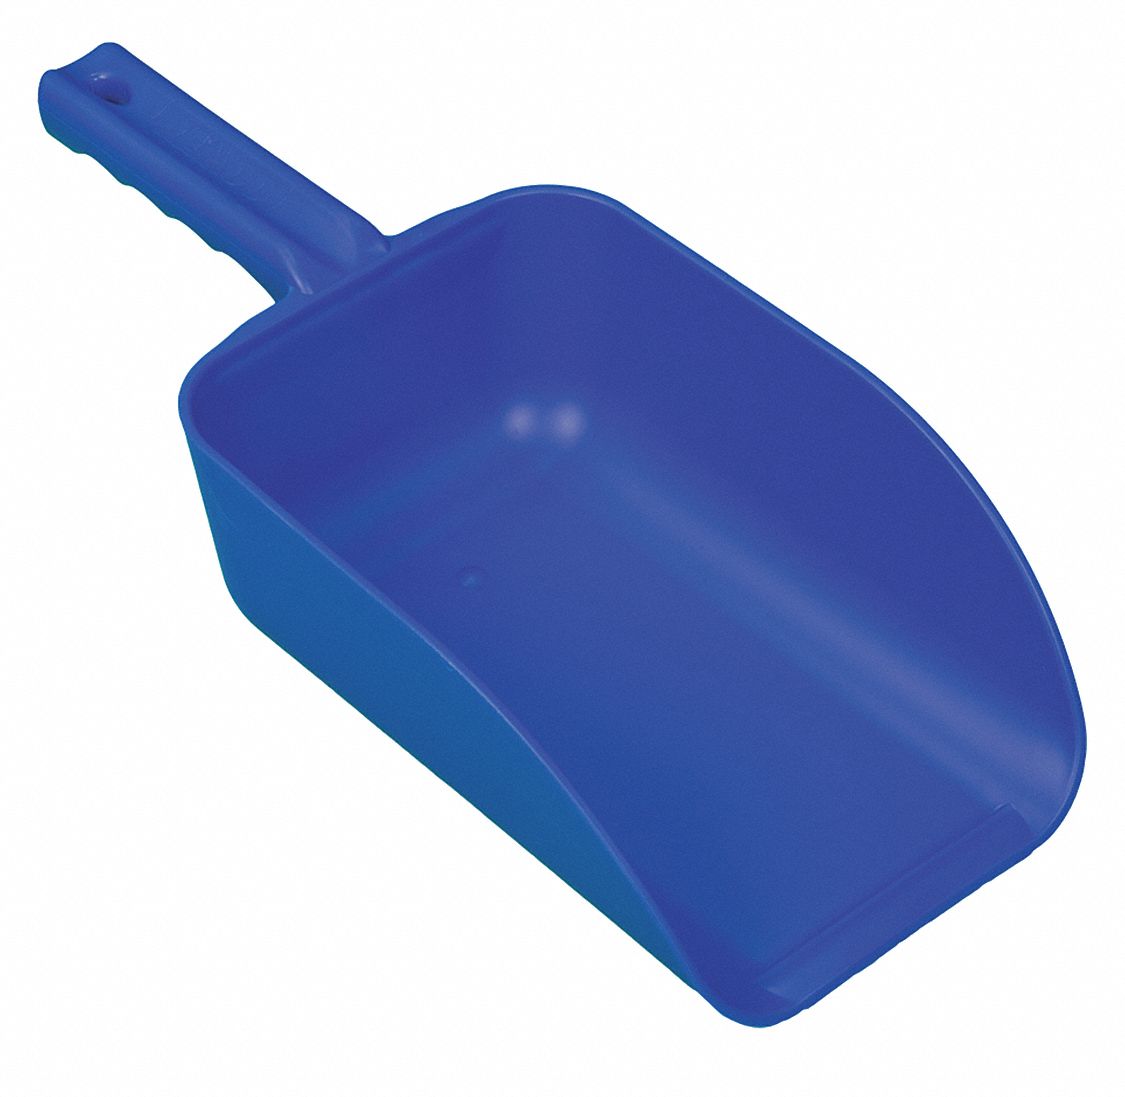 3UE72 - E0612 Large Hand Scoop Blue 15 x 6-1/2 In